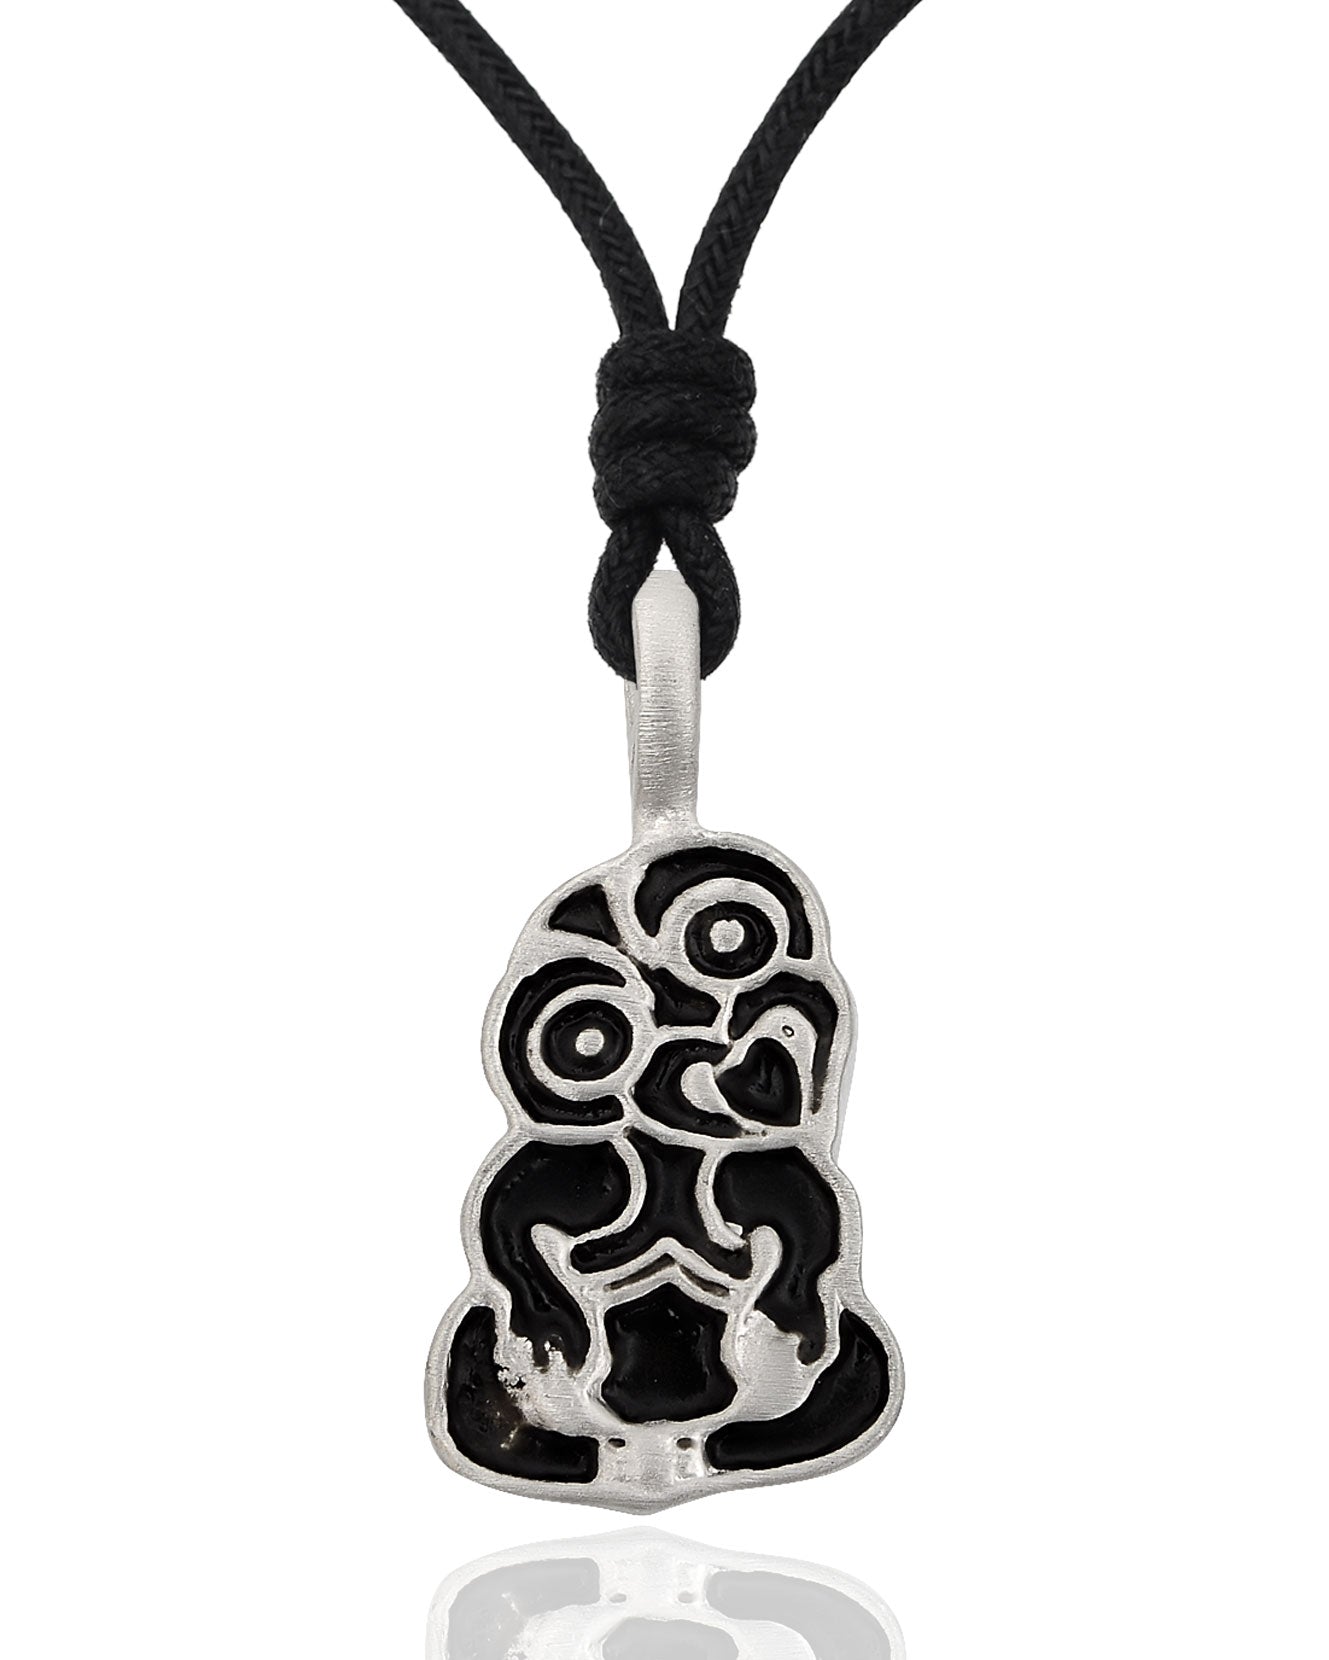 Maori Warrior Silver Pewter Charm Necklace Pendant Jewelry